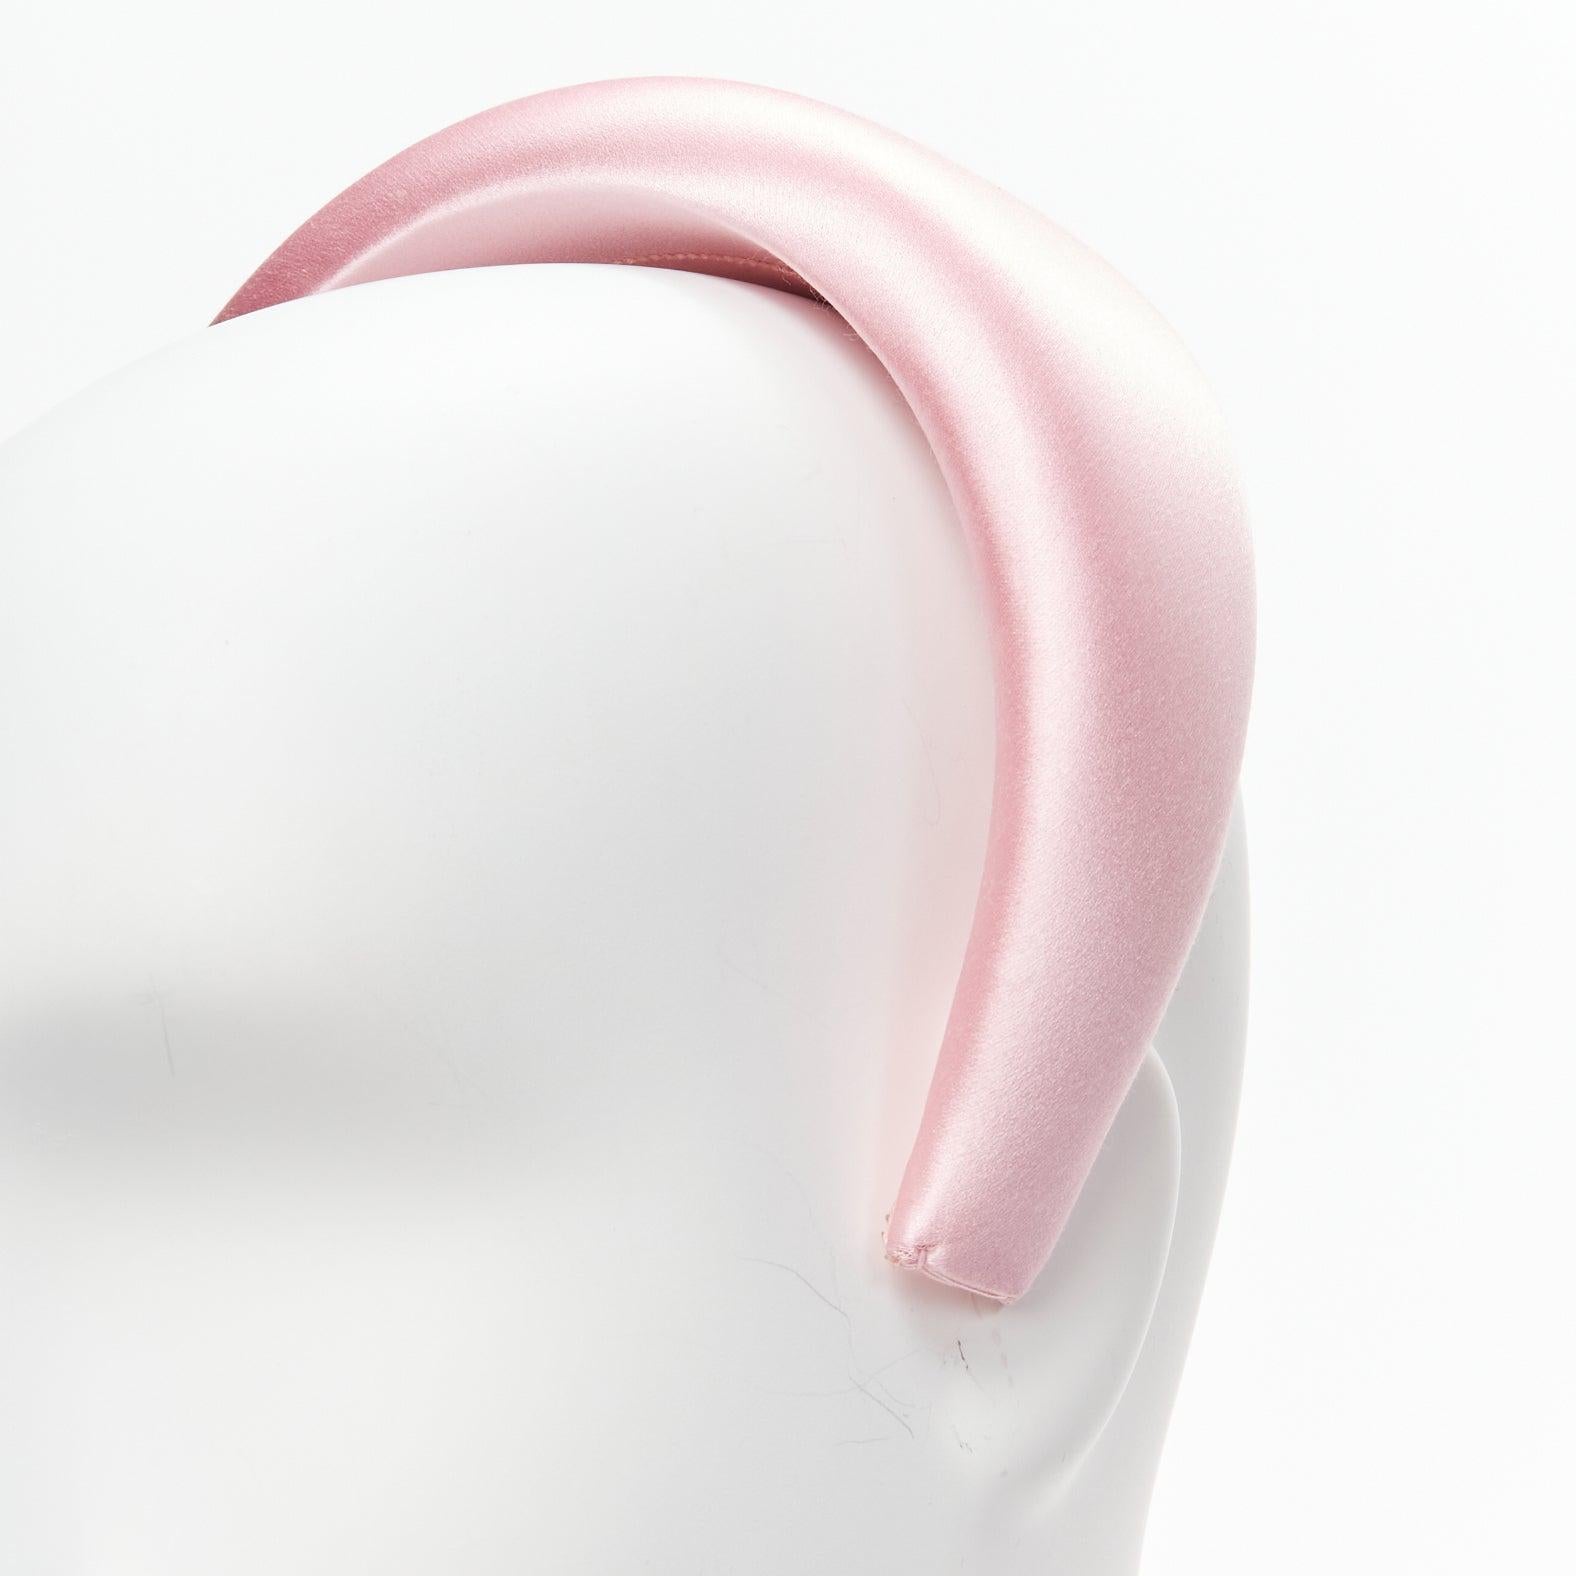 PRADA Alice light pink satin oversized padded puffy headband
Reference: BSHW/A00126
Brand: Prada
Designer: Miuccia Prada
Collection: Runway
Material: Fabric
Color: Pink
Pattern: Solid
Lining: Pink Fabric

CONDITION:
Condition: Very good, this item